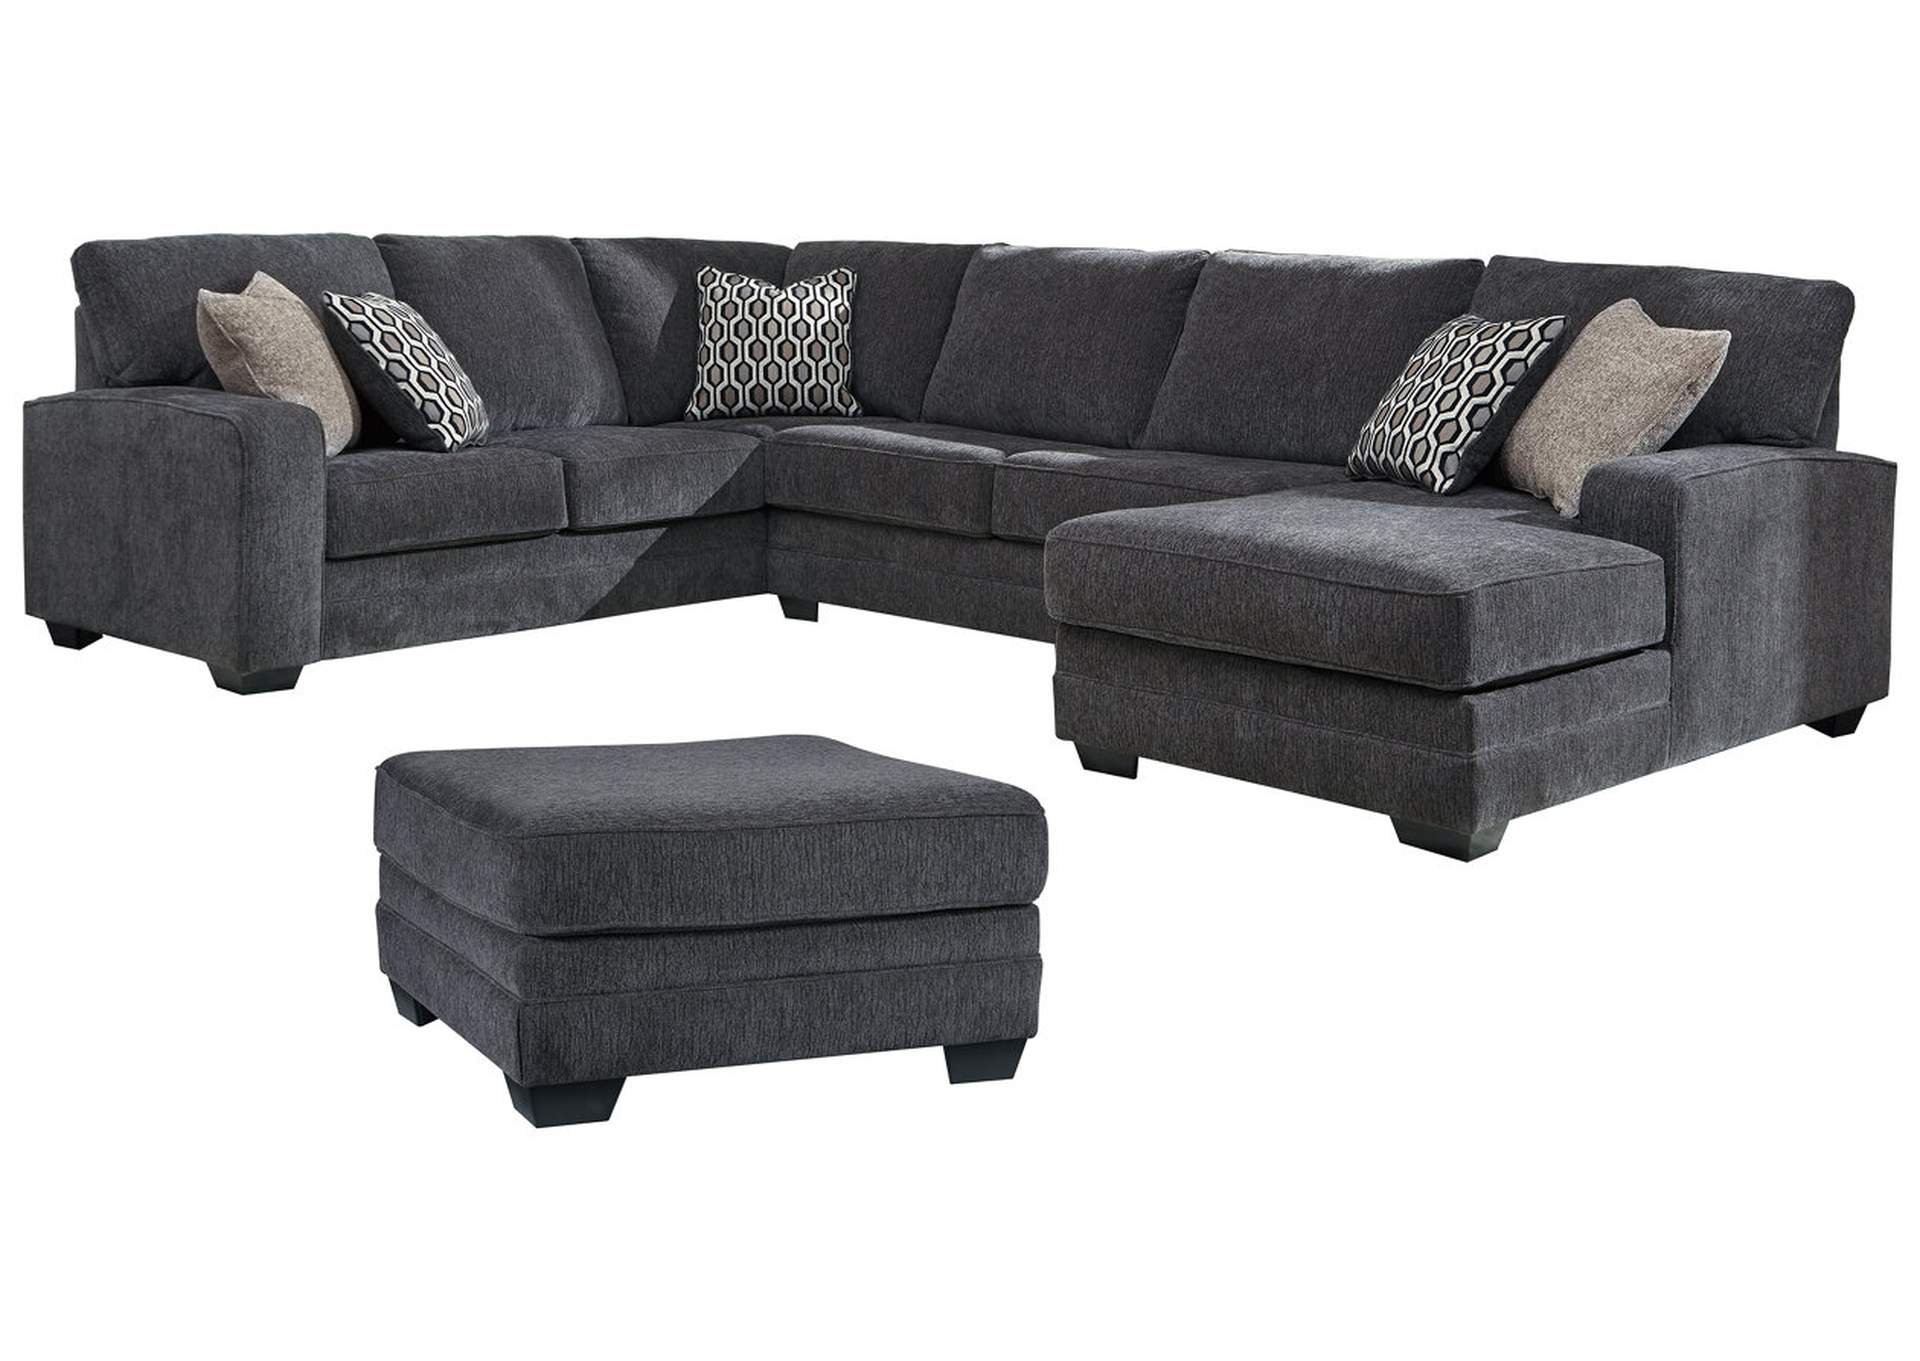 Tracling 3-Piece Sectional with Ottoman,Benchcraft